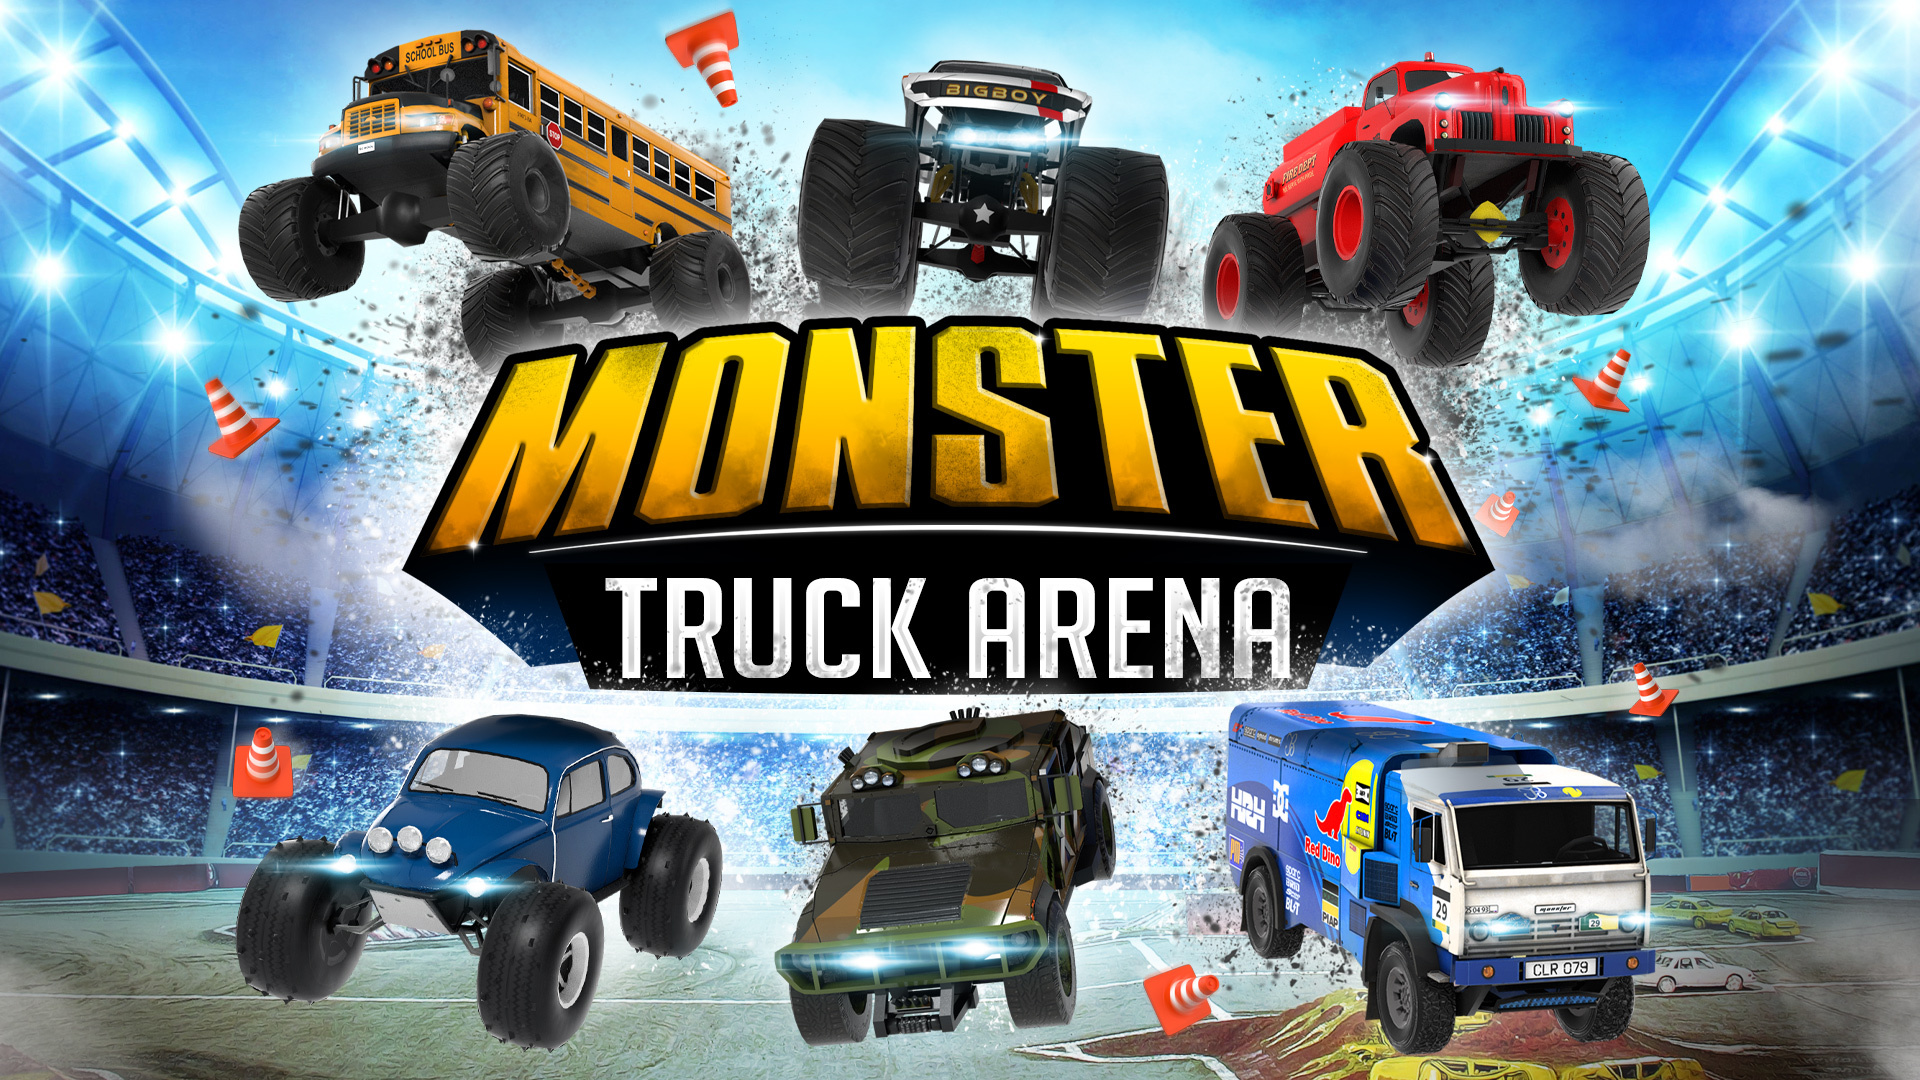 Monster Truck Arena Box Front